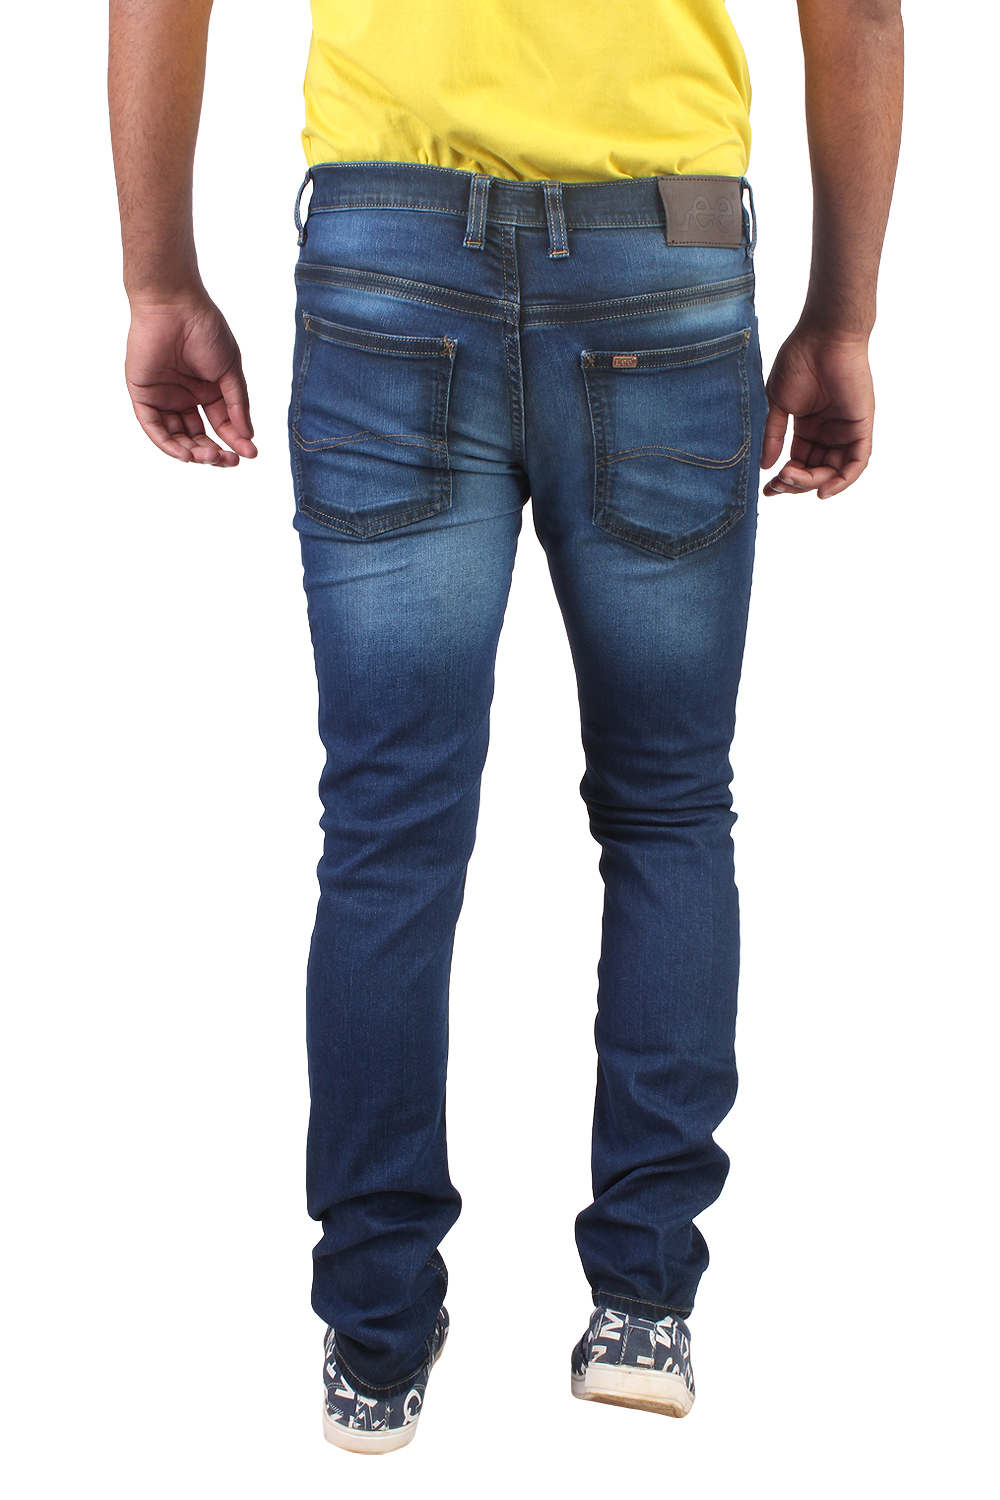 Buy Lee Green Skinny Fit Low Waist Mens Jeans Online @ ₹1799 from ShopClues